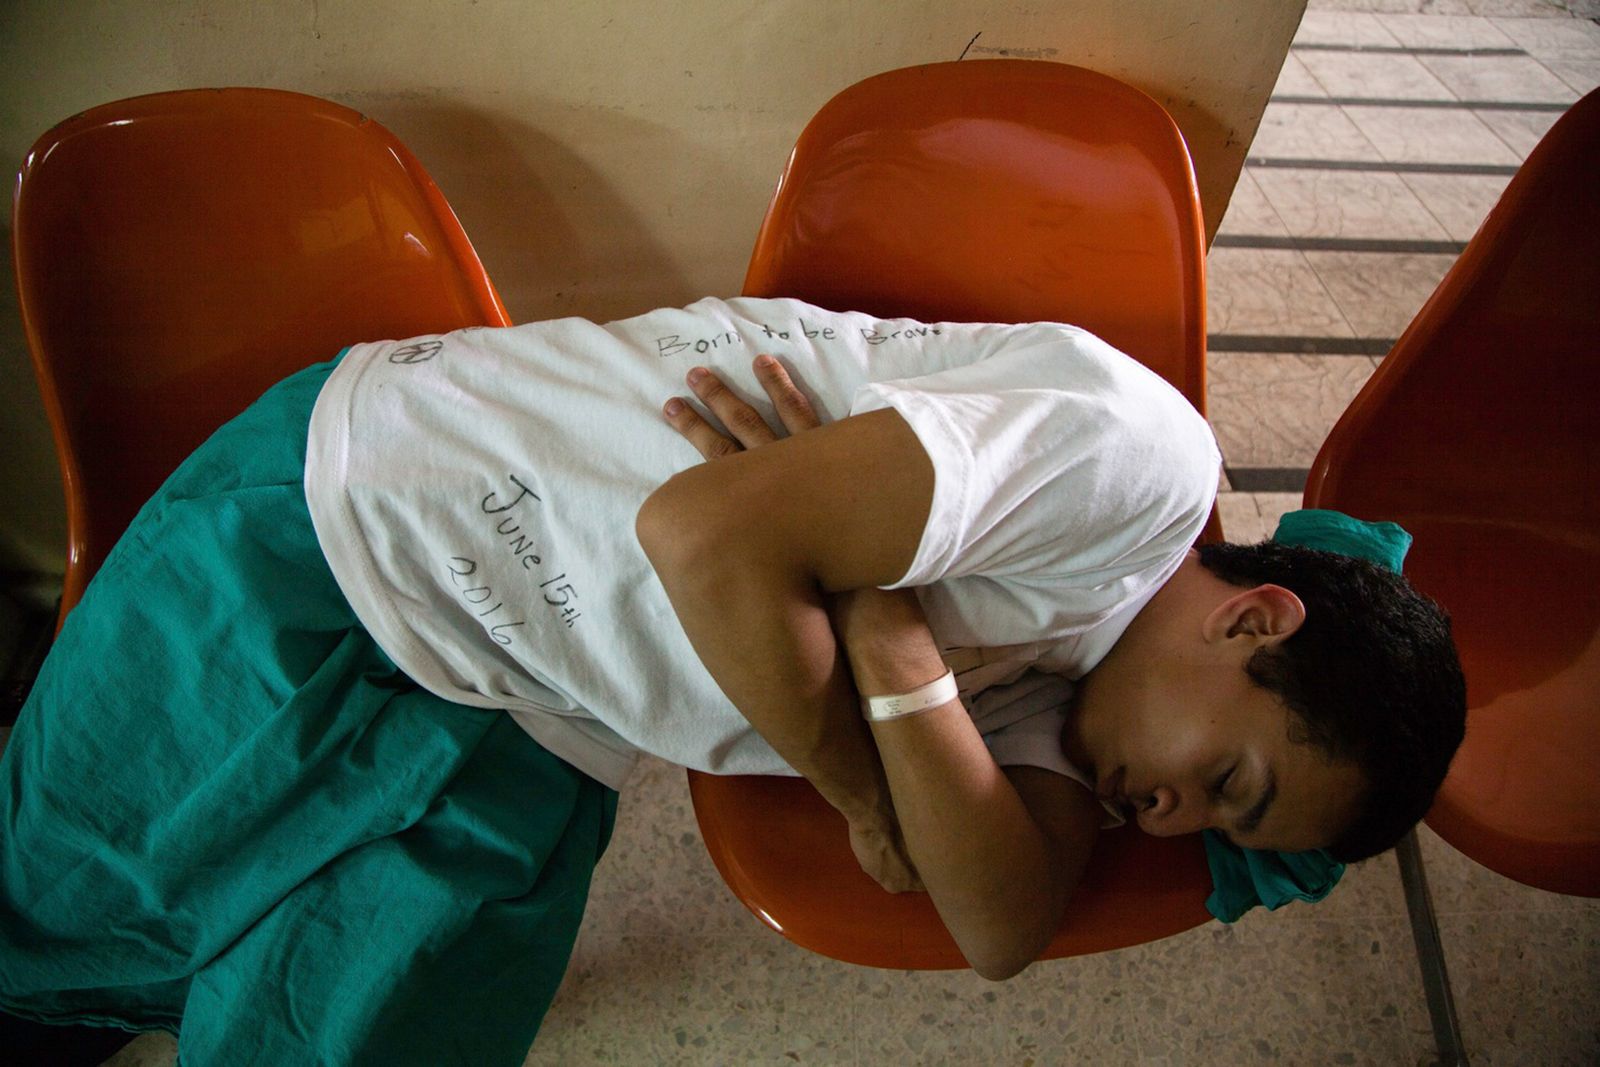 © Anneke Paterson - A young man rests while he awaits his procedure. Central Military Hospital, San Salvador, El Salvador, 2016.